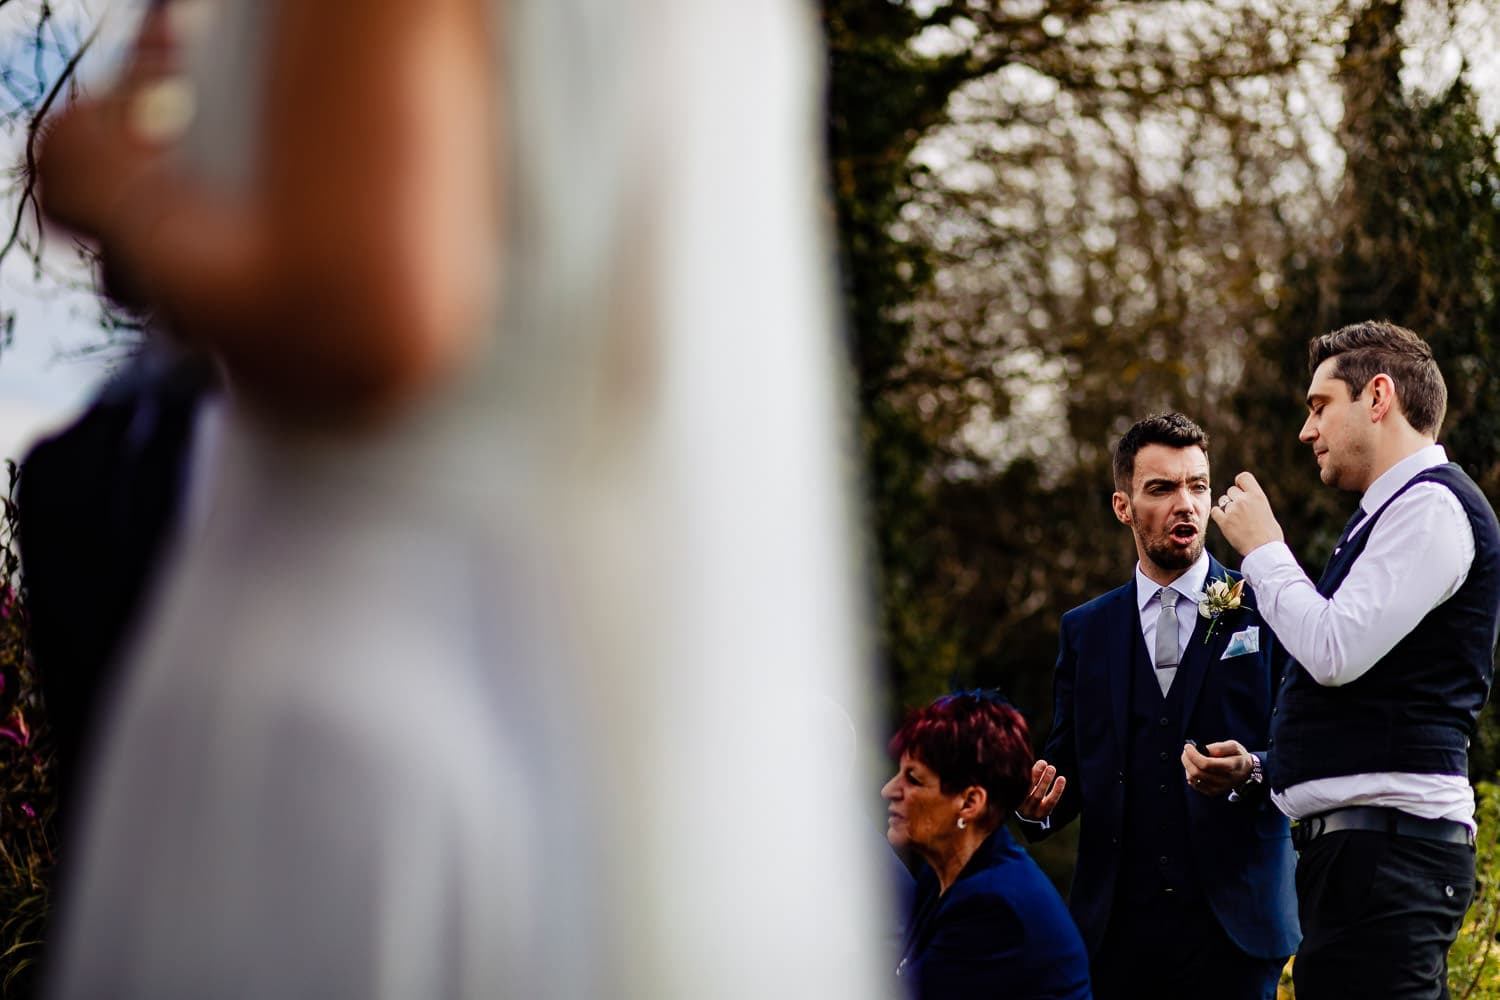 Groom talks with wedding guests during the wedding reception at The Old Stables Swithland